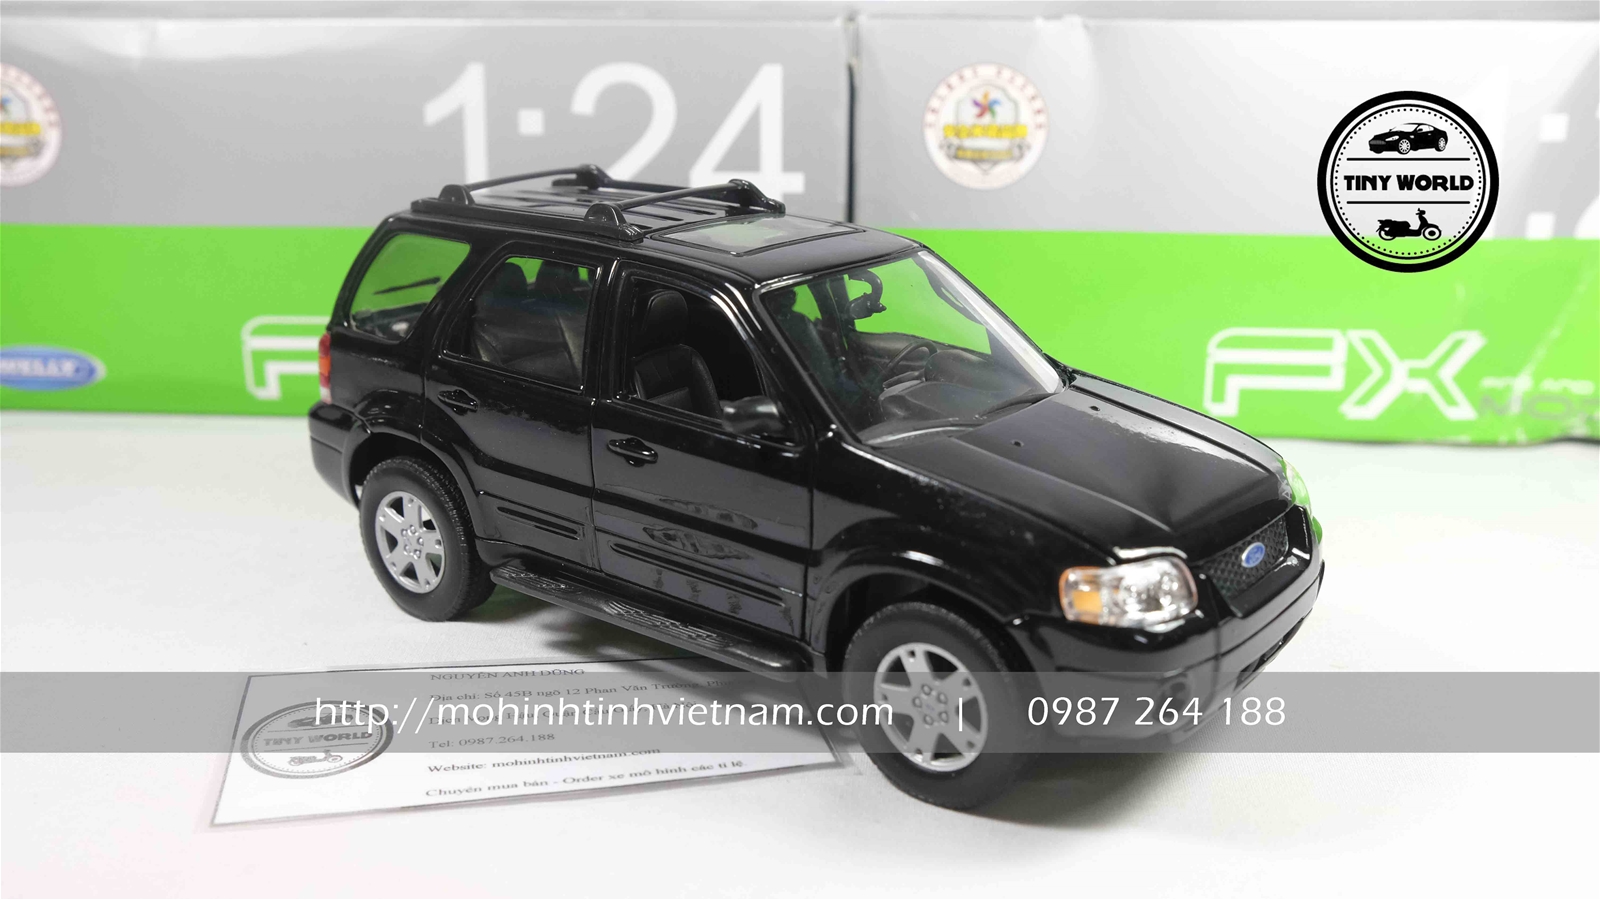 FORD ESCAPE XLT SPORT 2005 (ĐEN) 1:24 WELLY